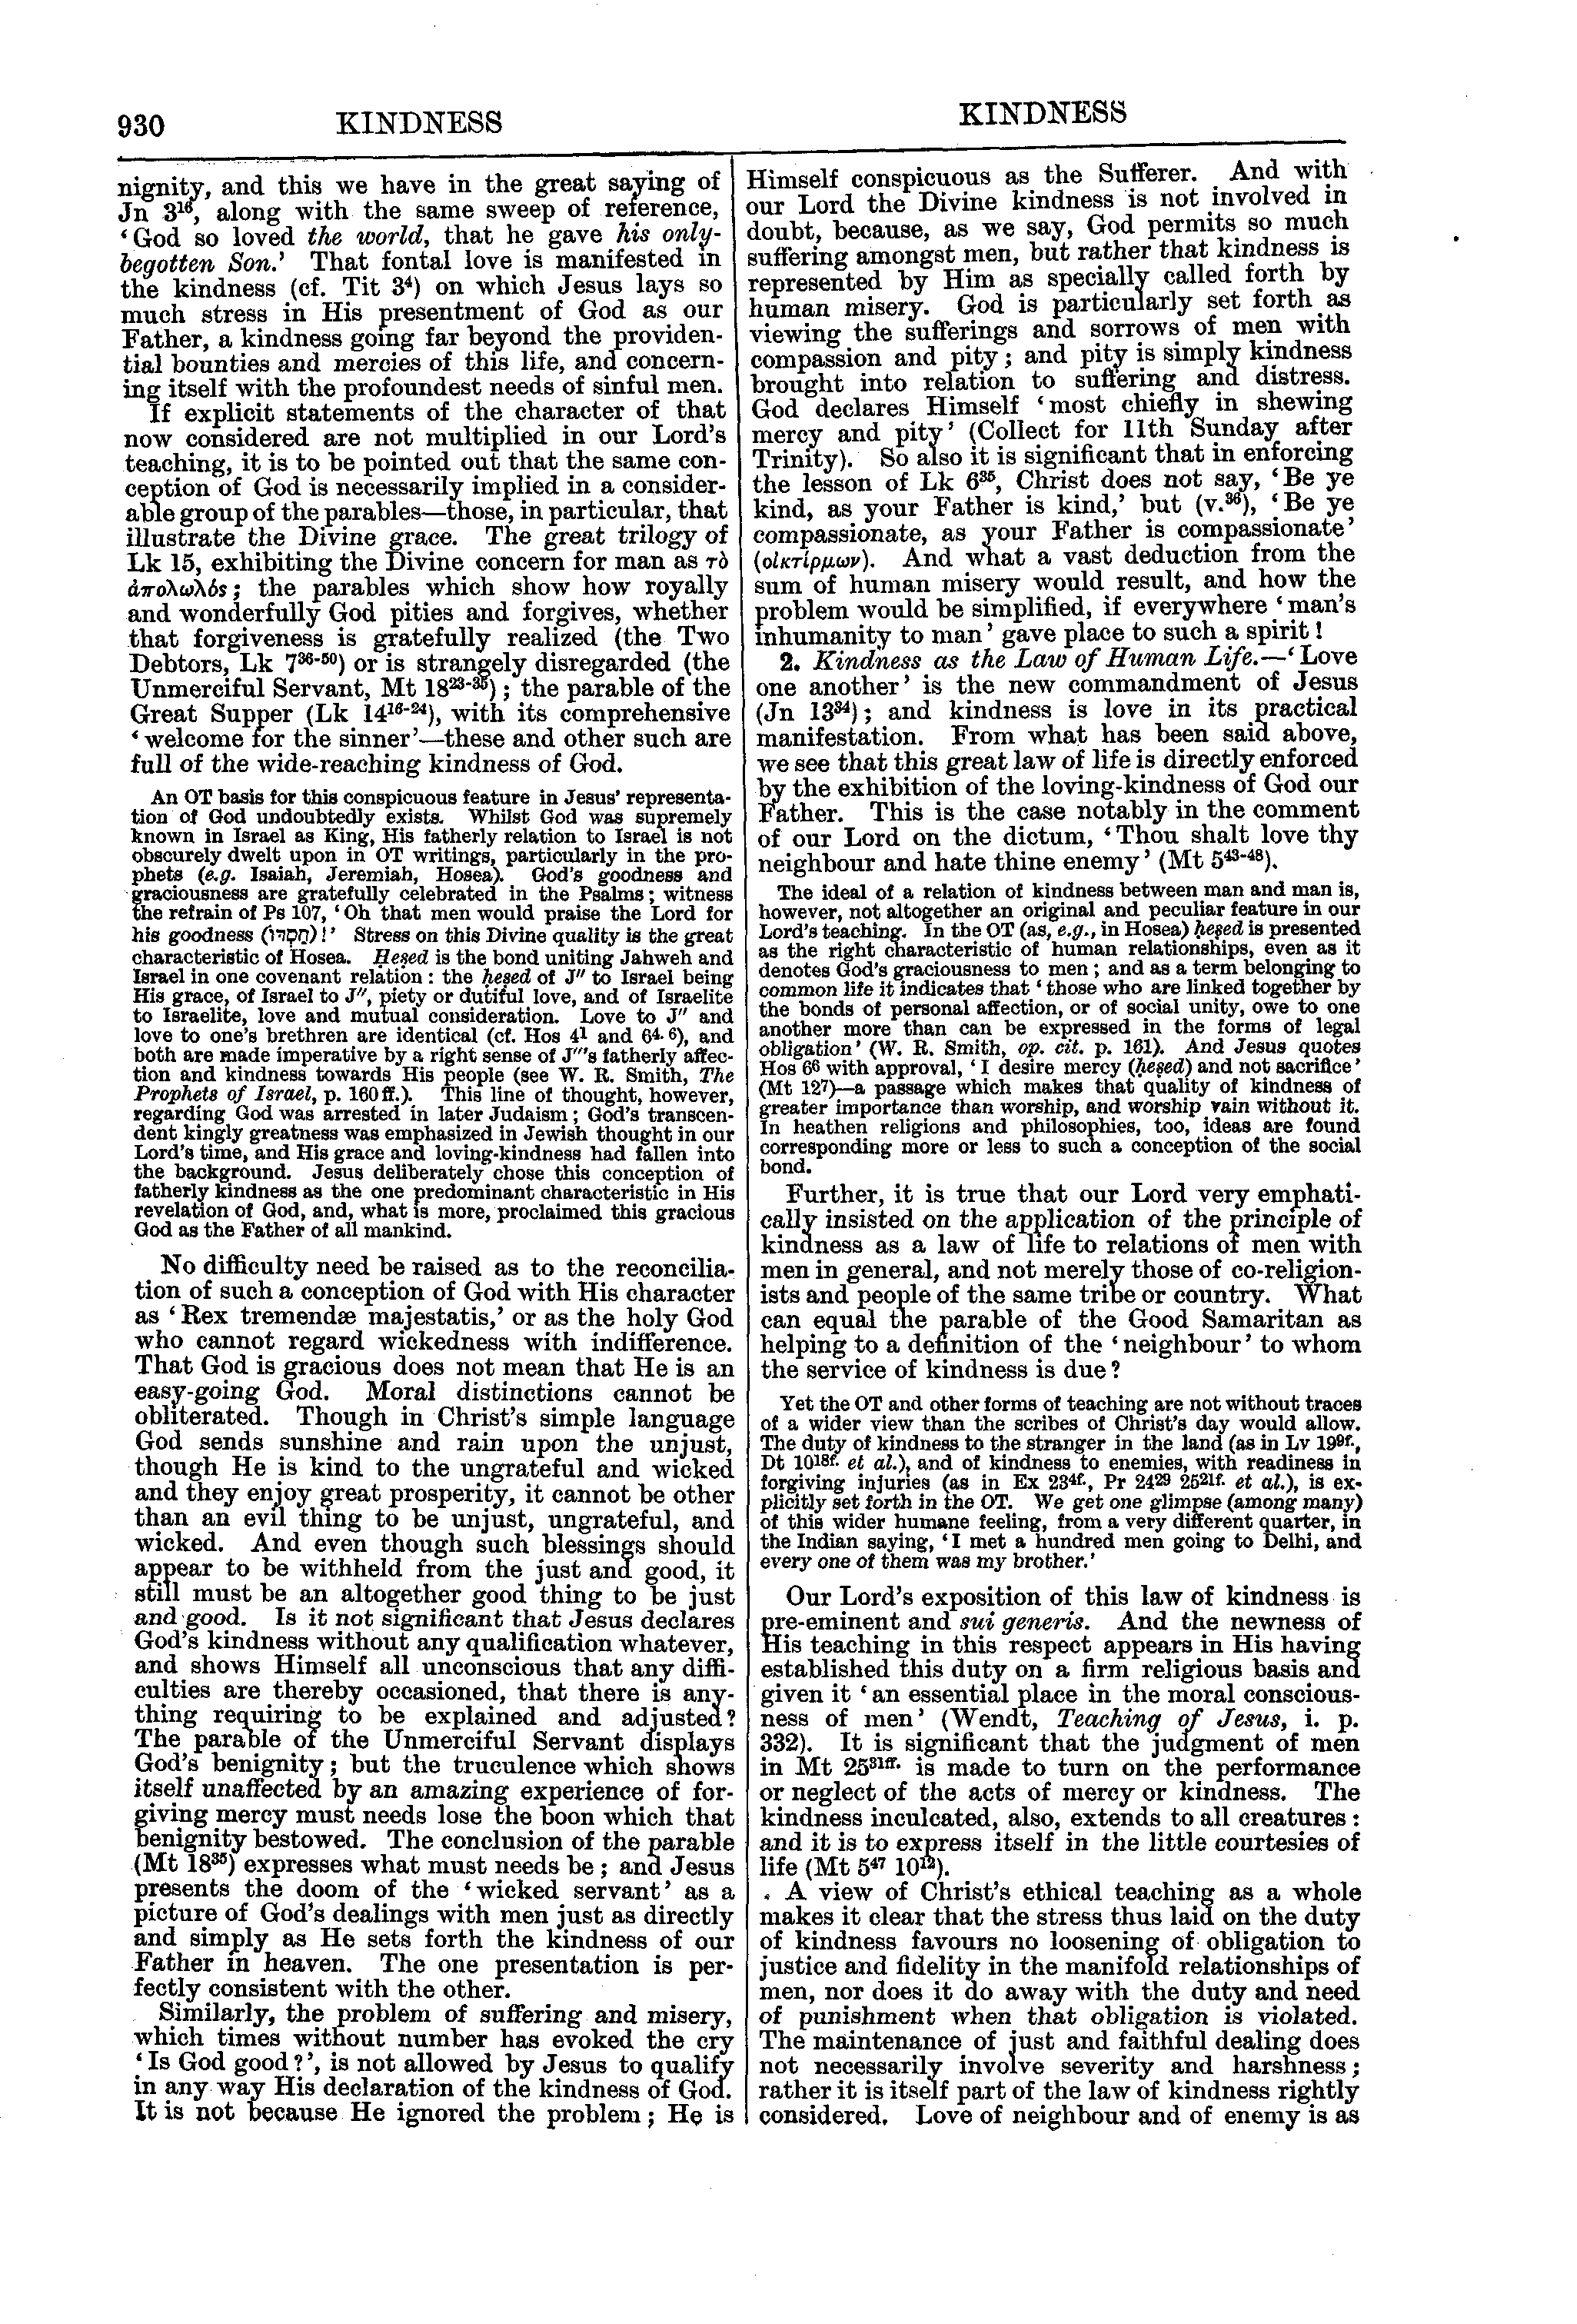 Image of page 930